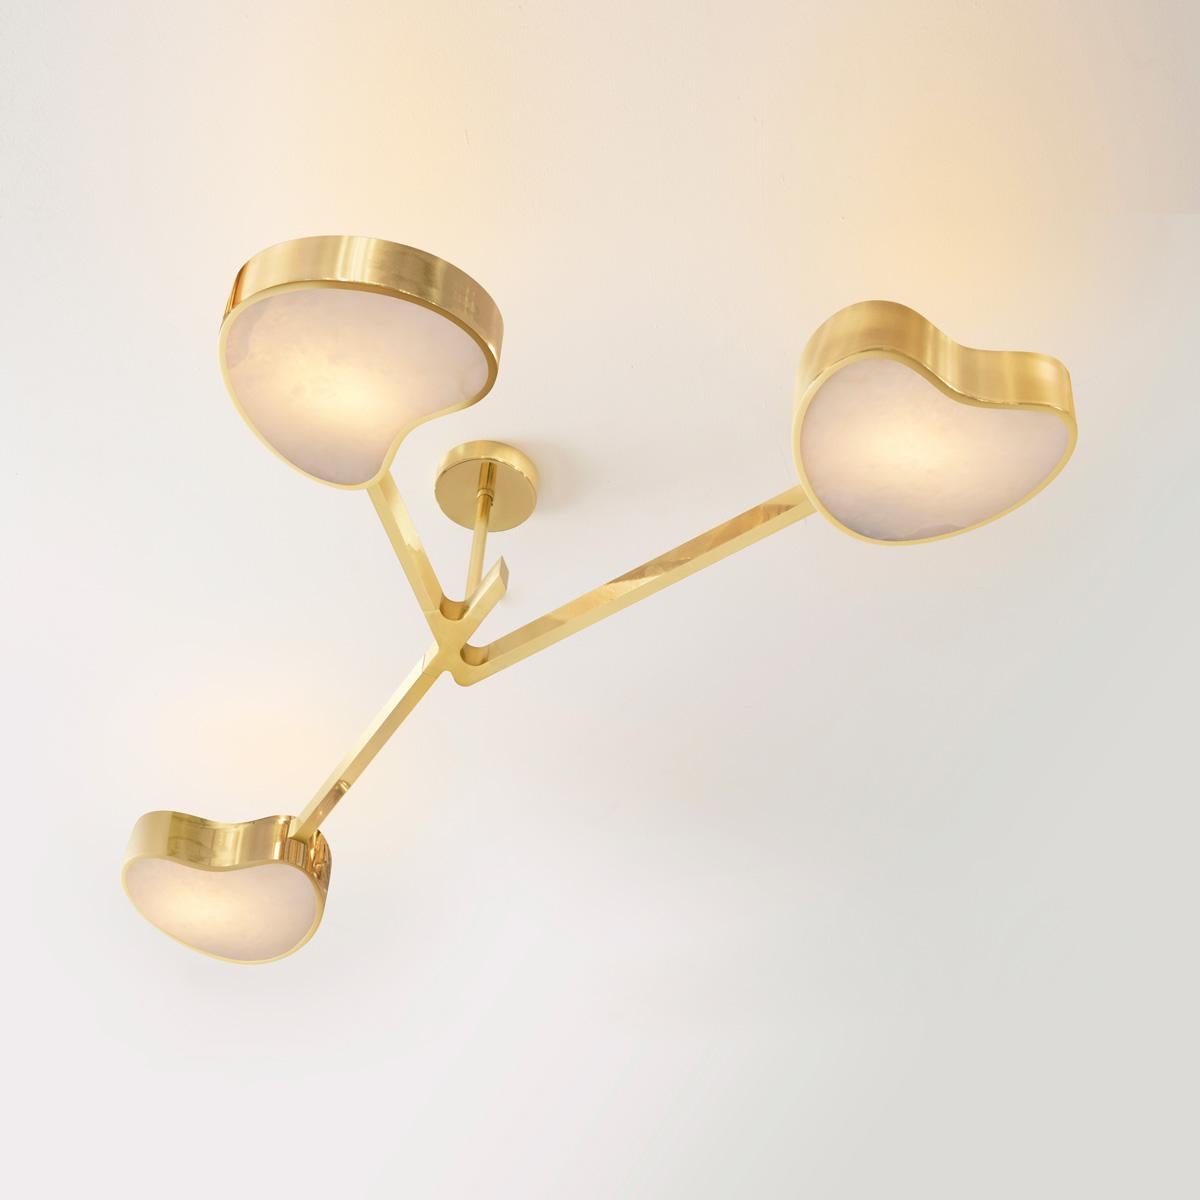 Modern Cuore N.3 Ceiling Light by Gaspare Asaro. Polished Brass Finish For Sale